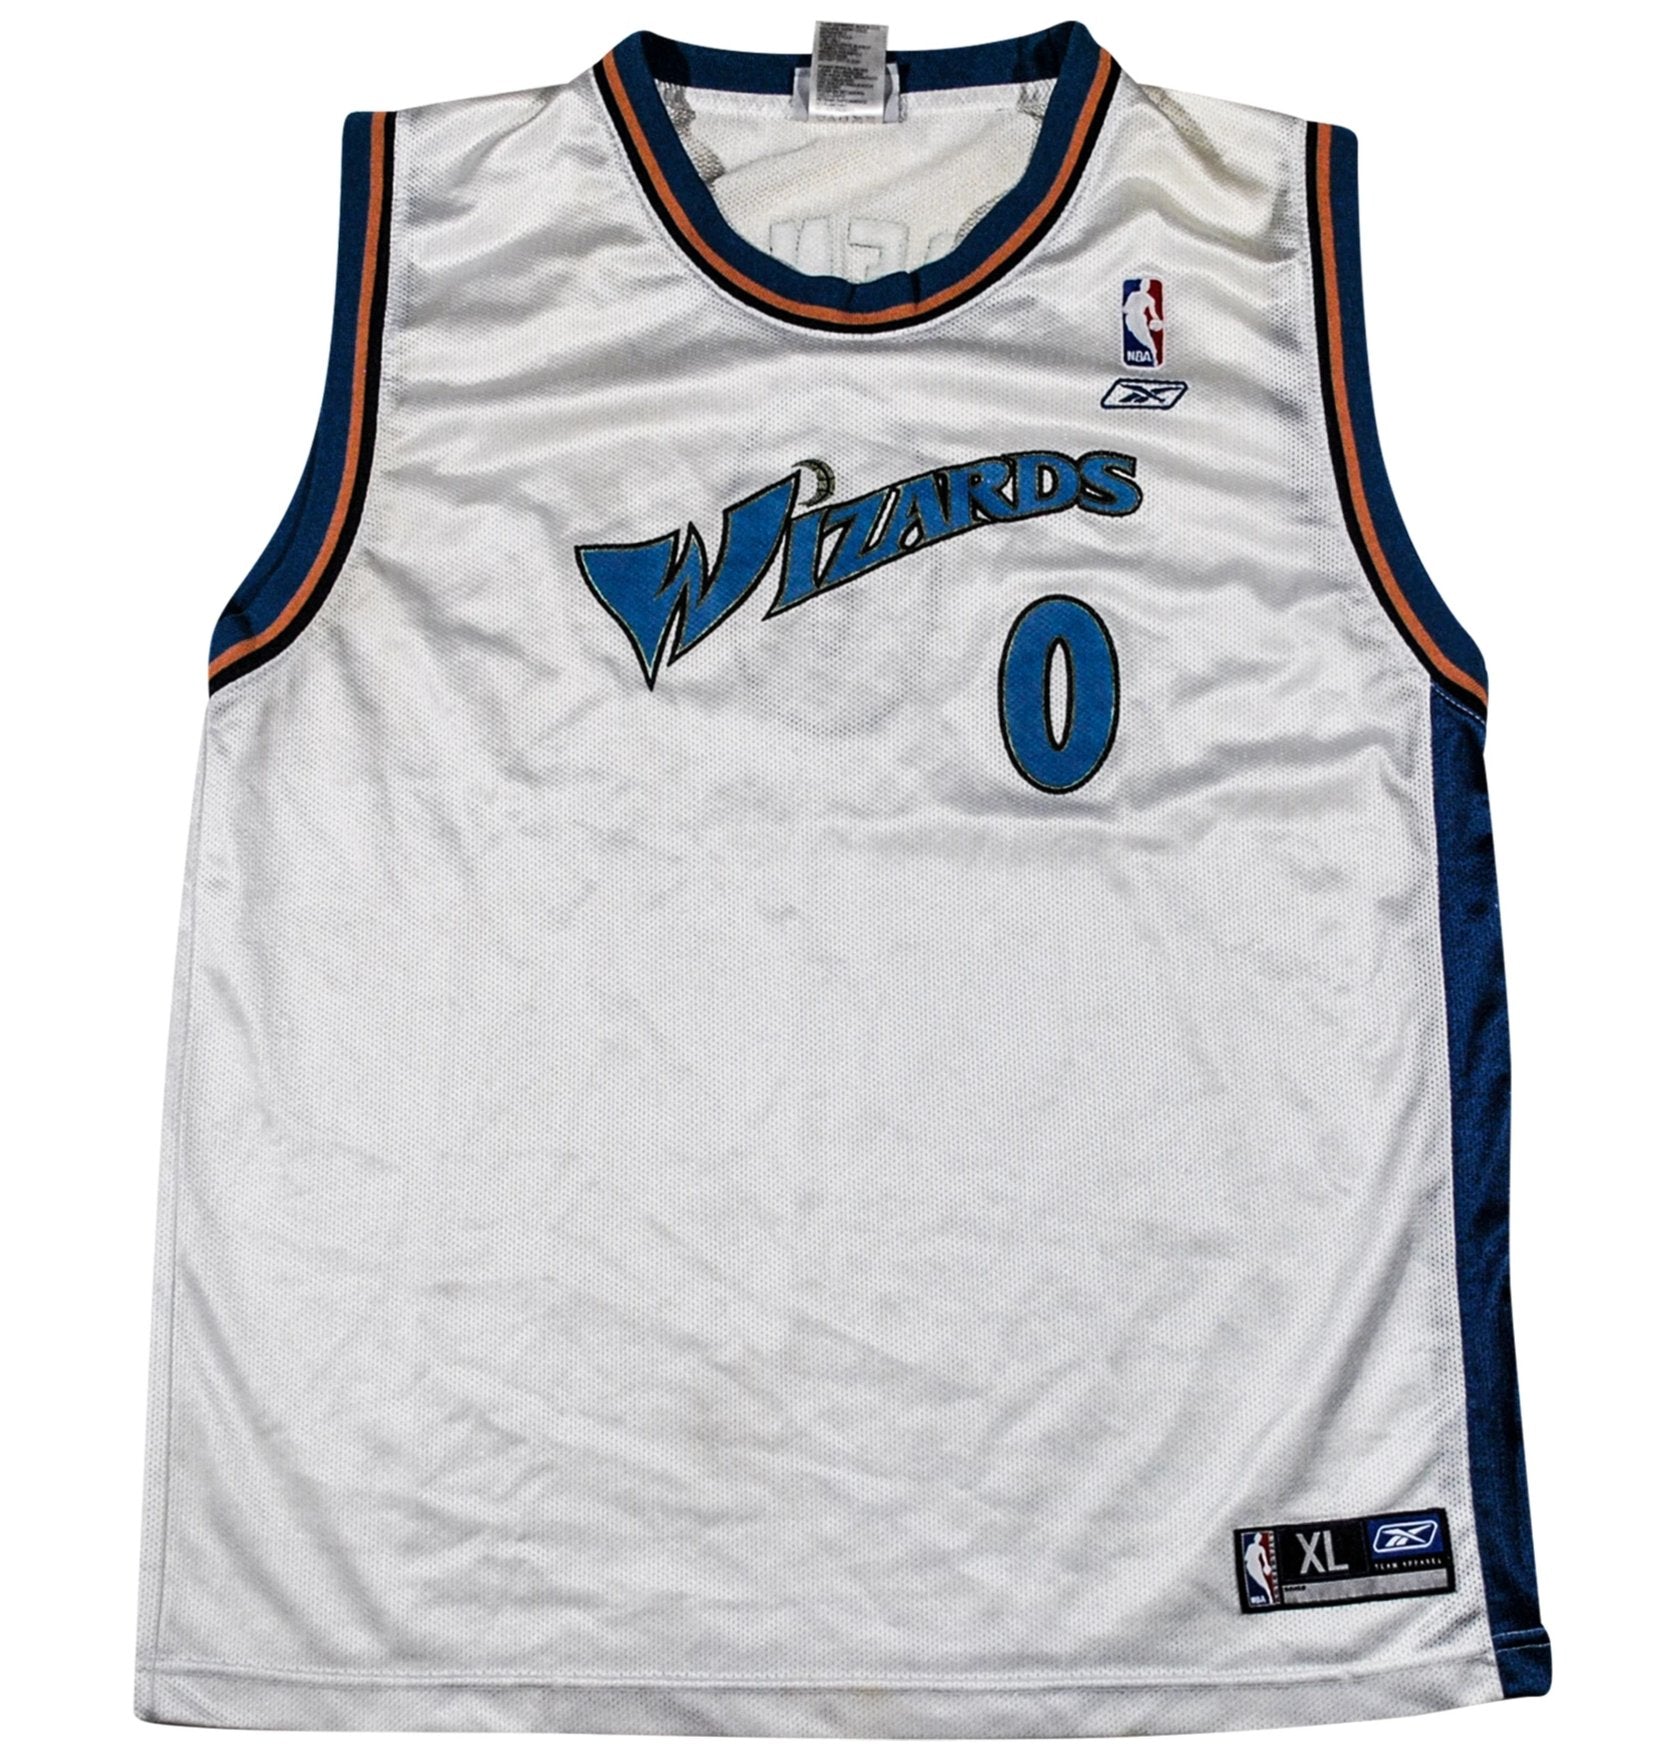 Washington Wizards Signed Jerseys, Collectible Wizards Jerseys